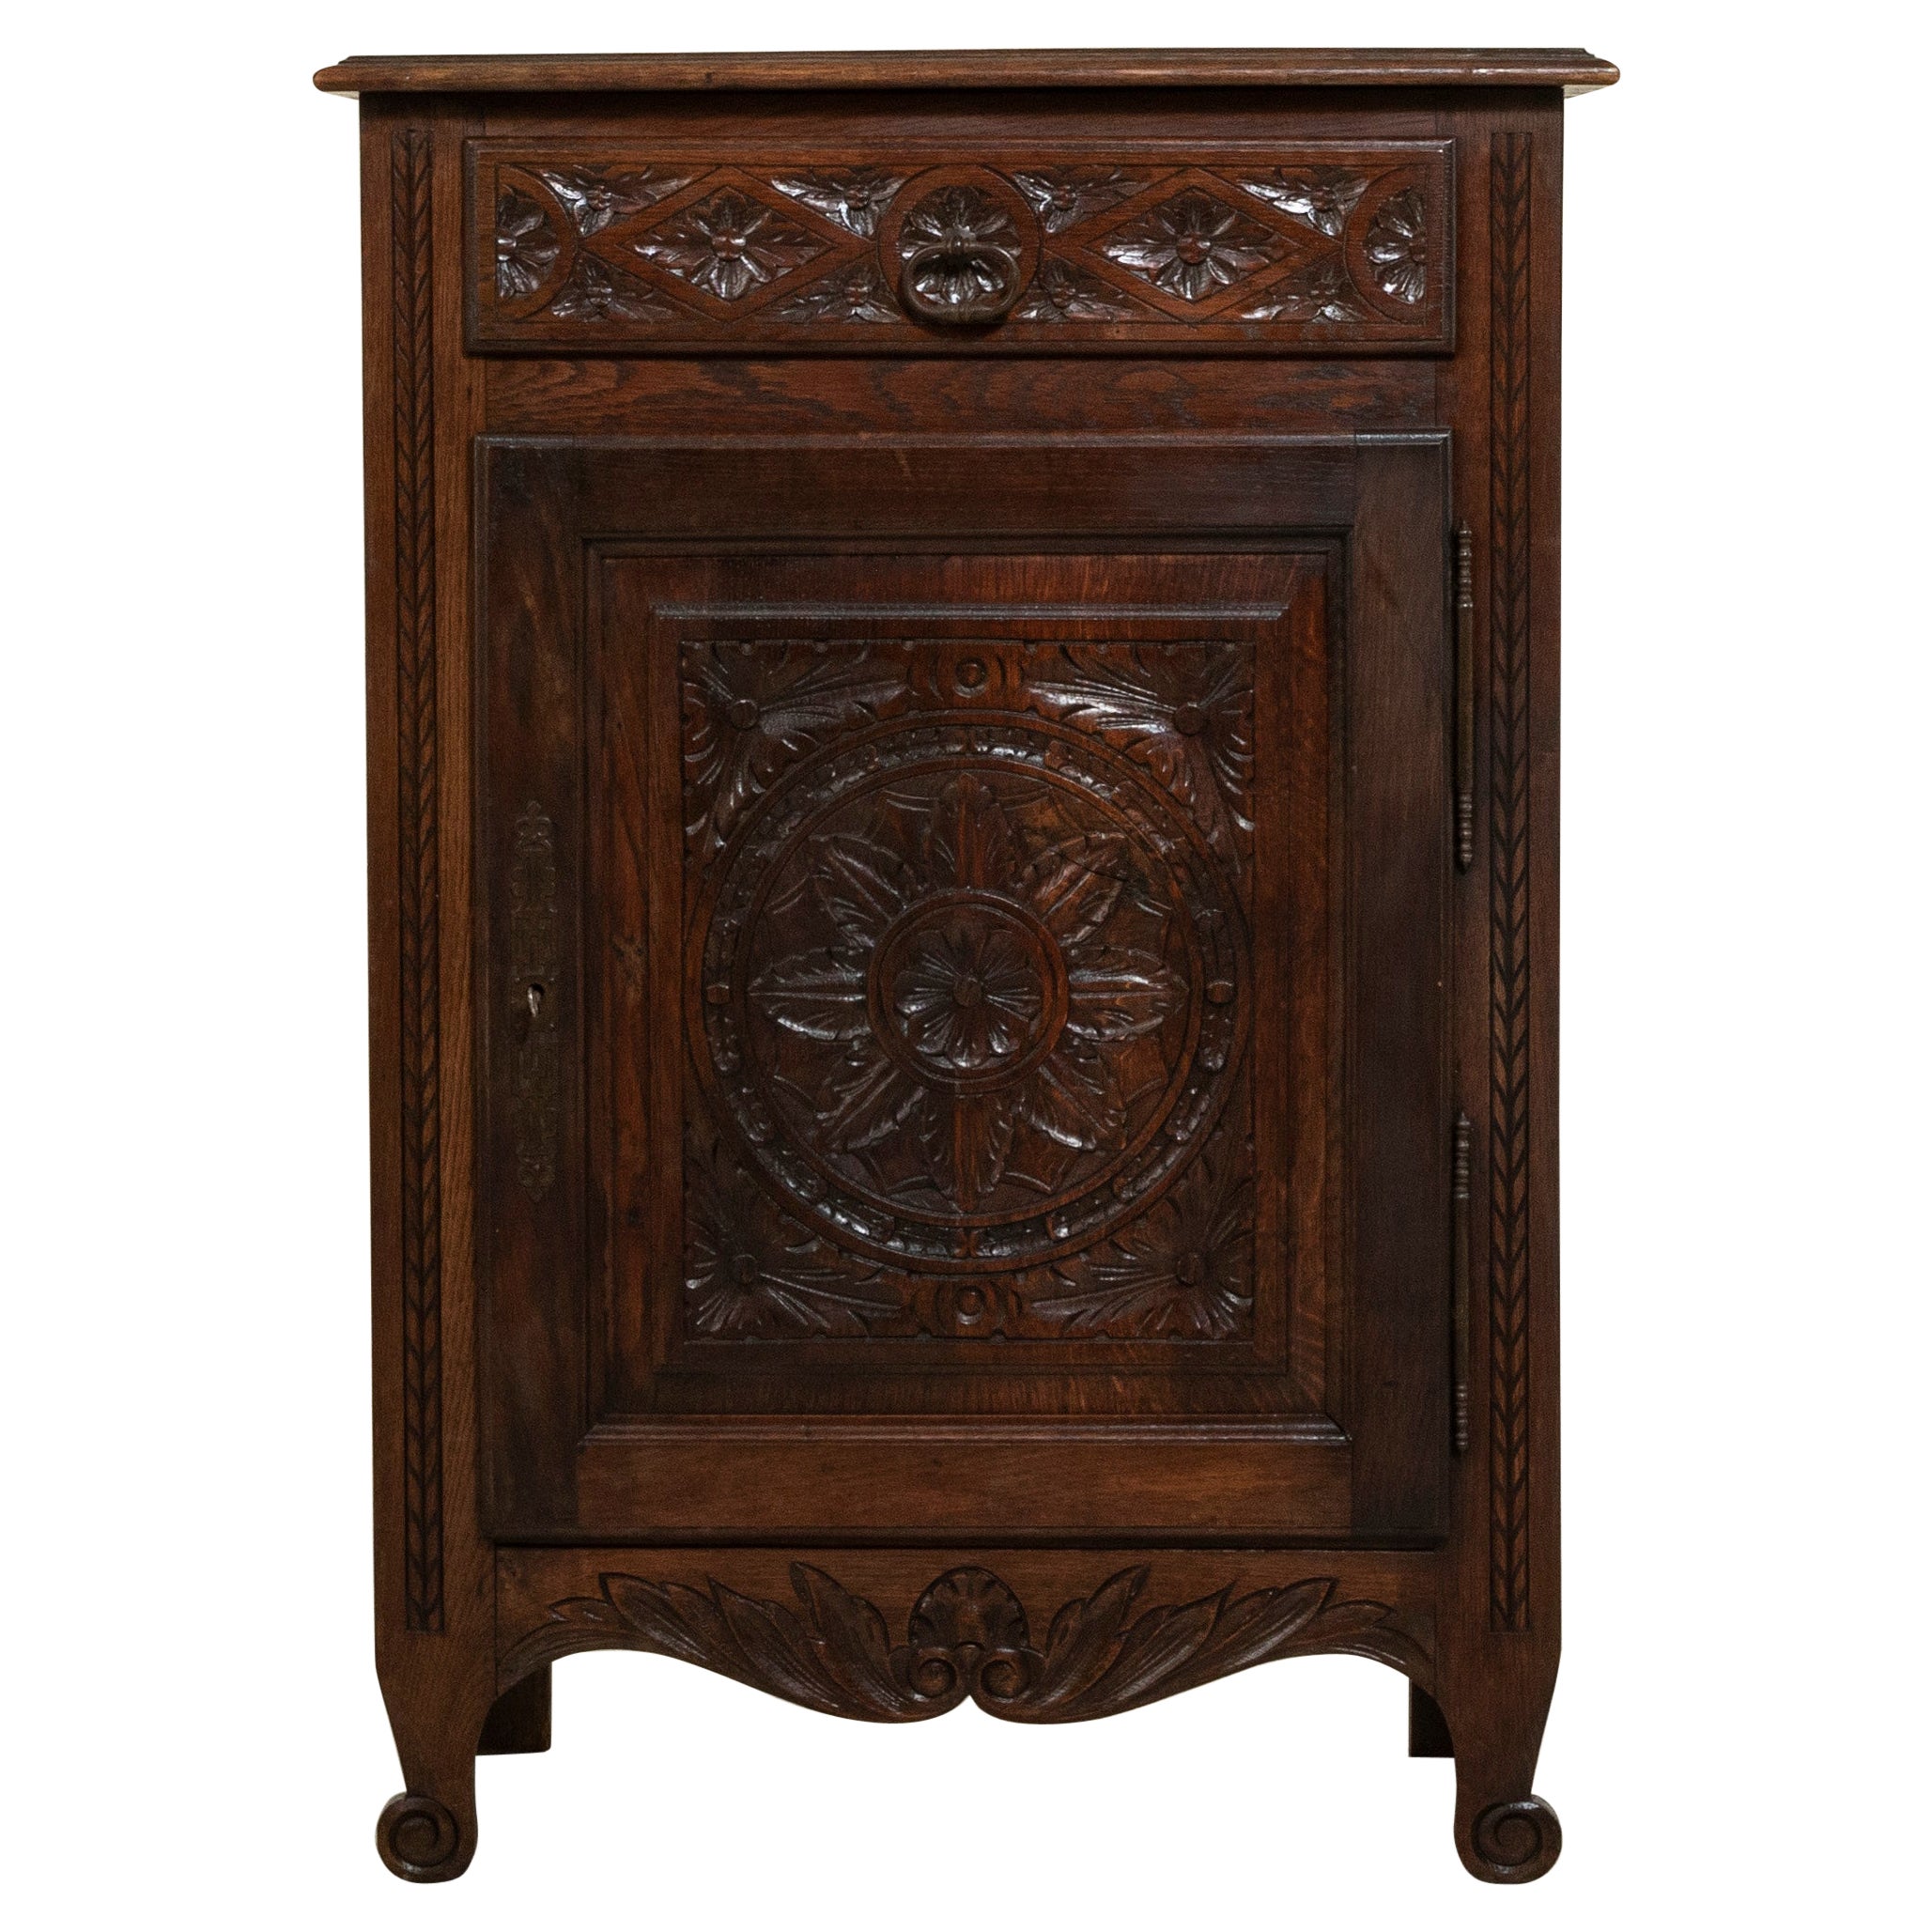 Early Twentieth century French Hand-Carved Oak Jam Cabinet from Brittany